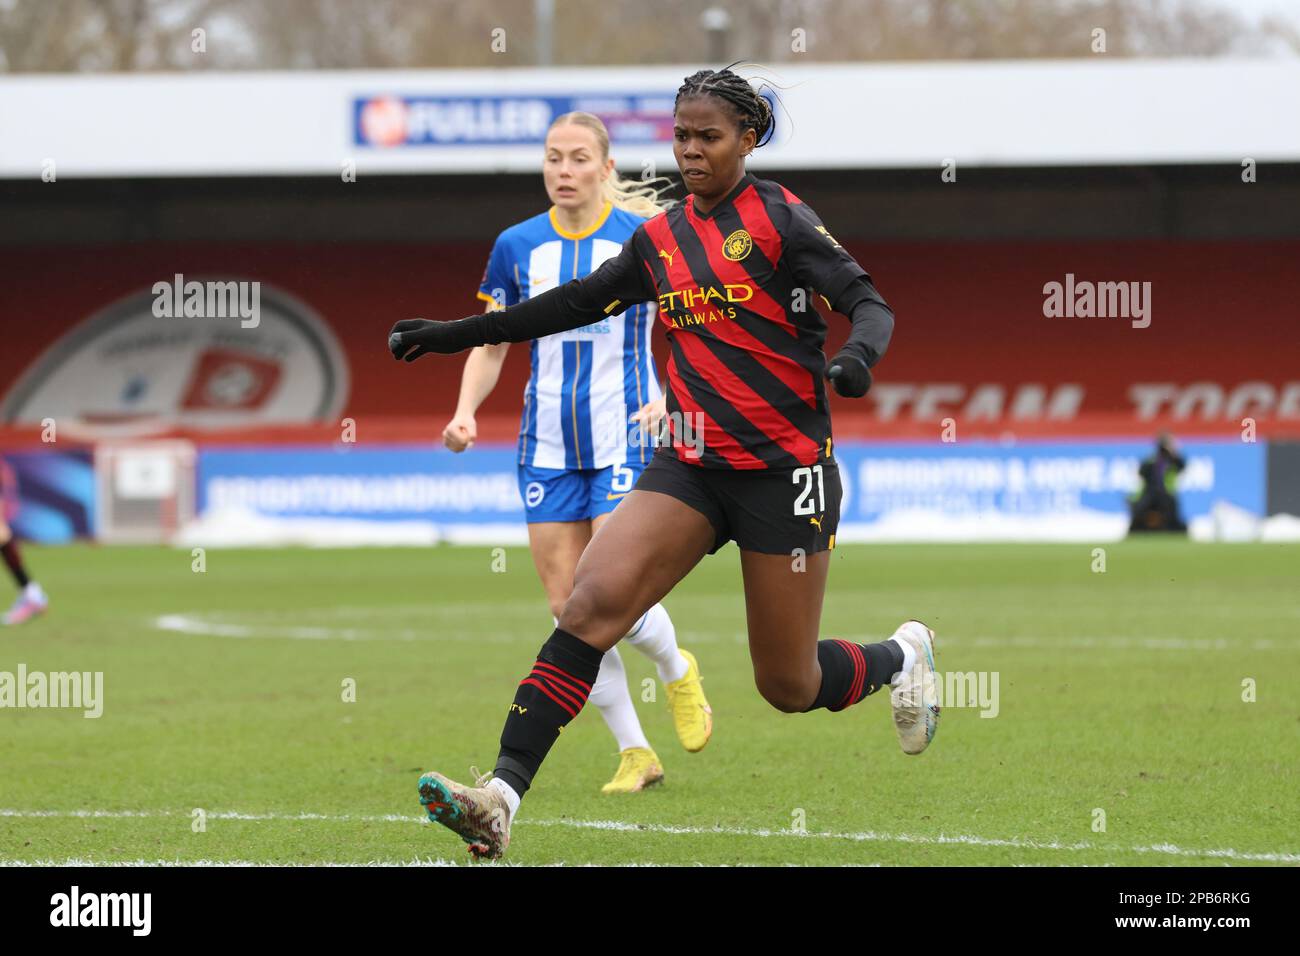 Crawley, UK. 12th Mar, 2023. Crawley, England, March 12th 2023: Khadija Shaw (MAN CITY, 21) at the Barclays FA Women's Super League football match between Brighton and Manchester City at Broadfield Stadium in Crawley, England. (Bettina Weissensteiner/SPP) Credit: SPP Sport Press Photo. /Alamy Live News Stock Photo